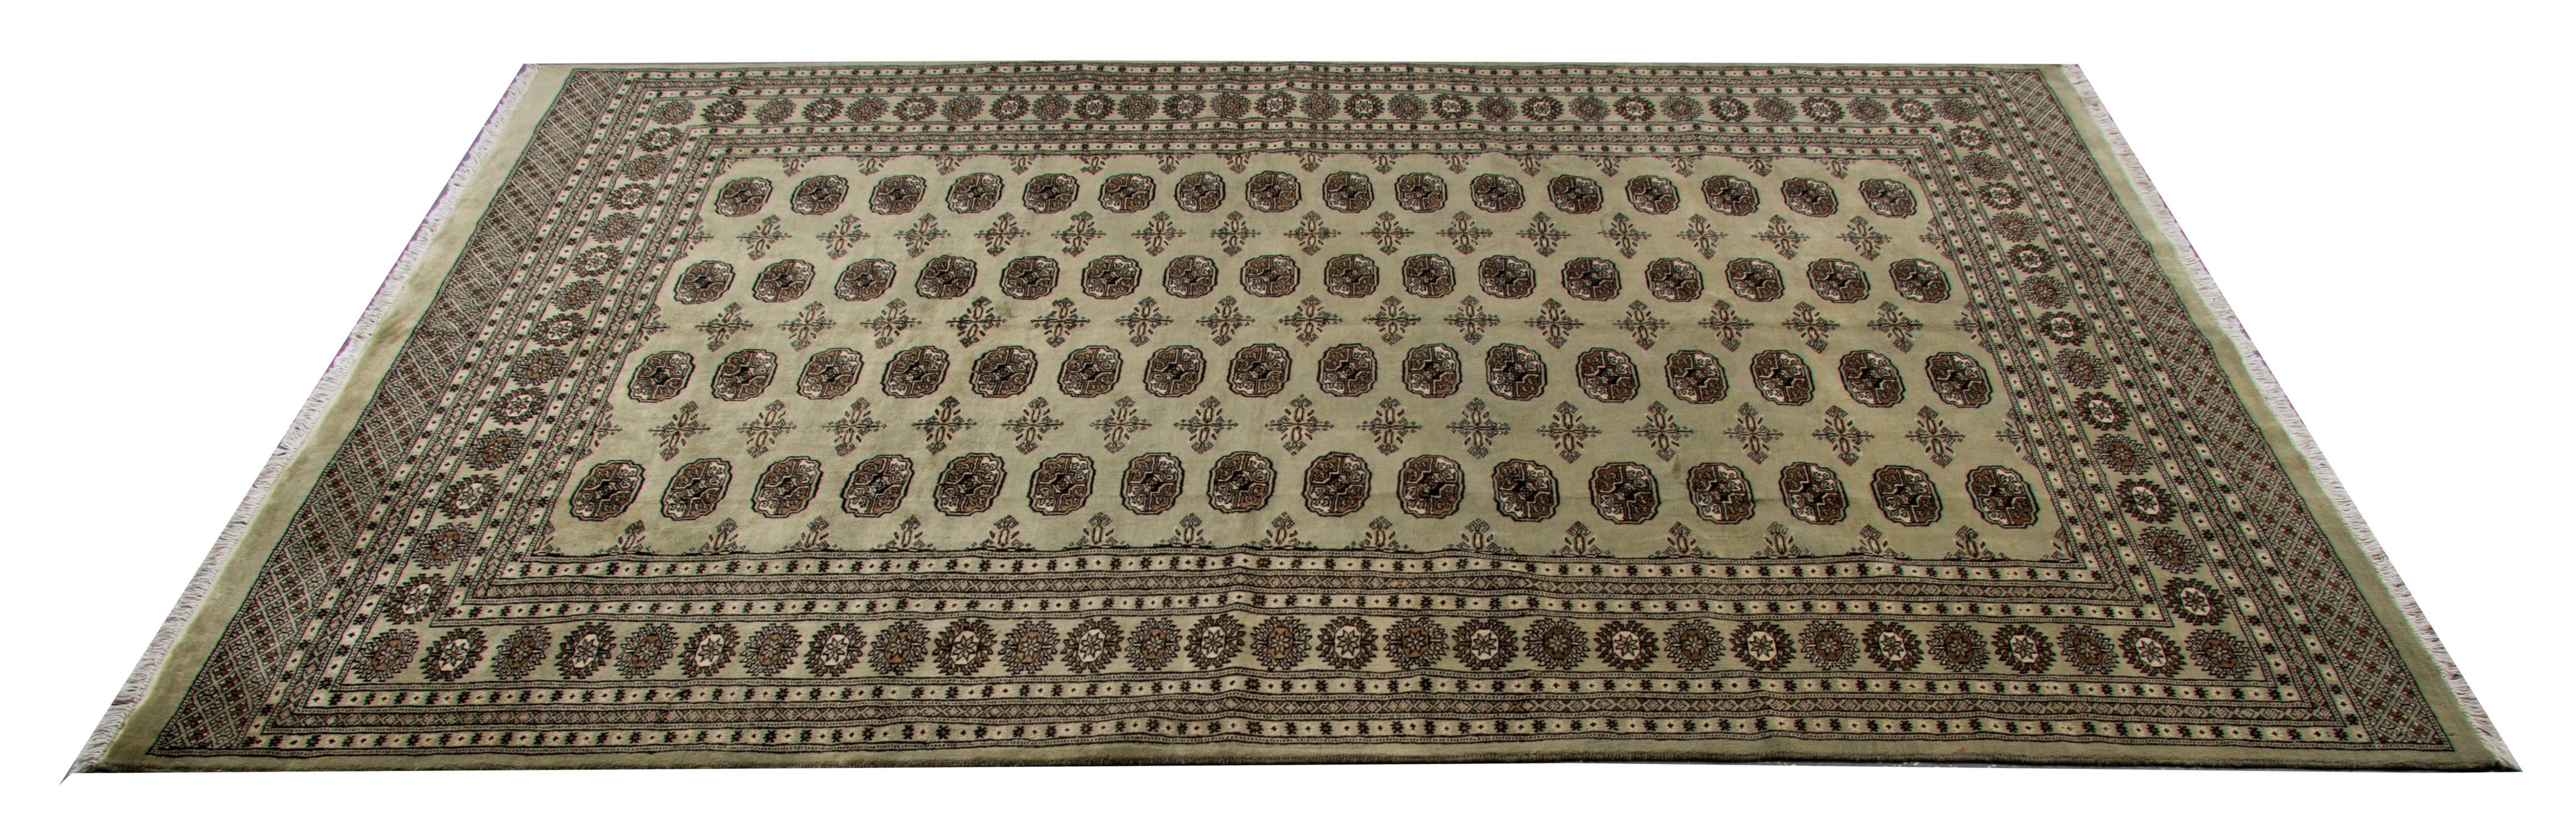 Bukhara handmade rugs and hallway carpet runners are hand-knotted in Pakistan by master weavers in a traditional elephant's foot motif. The 100% wool pile is dyed and washed to create a Lustre that makes unique rugs and adds them to this classic